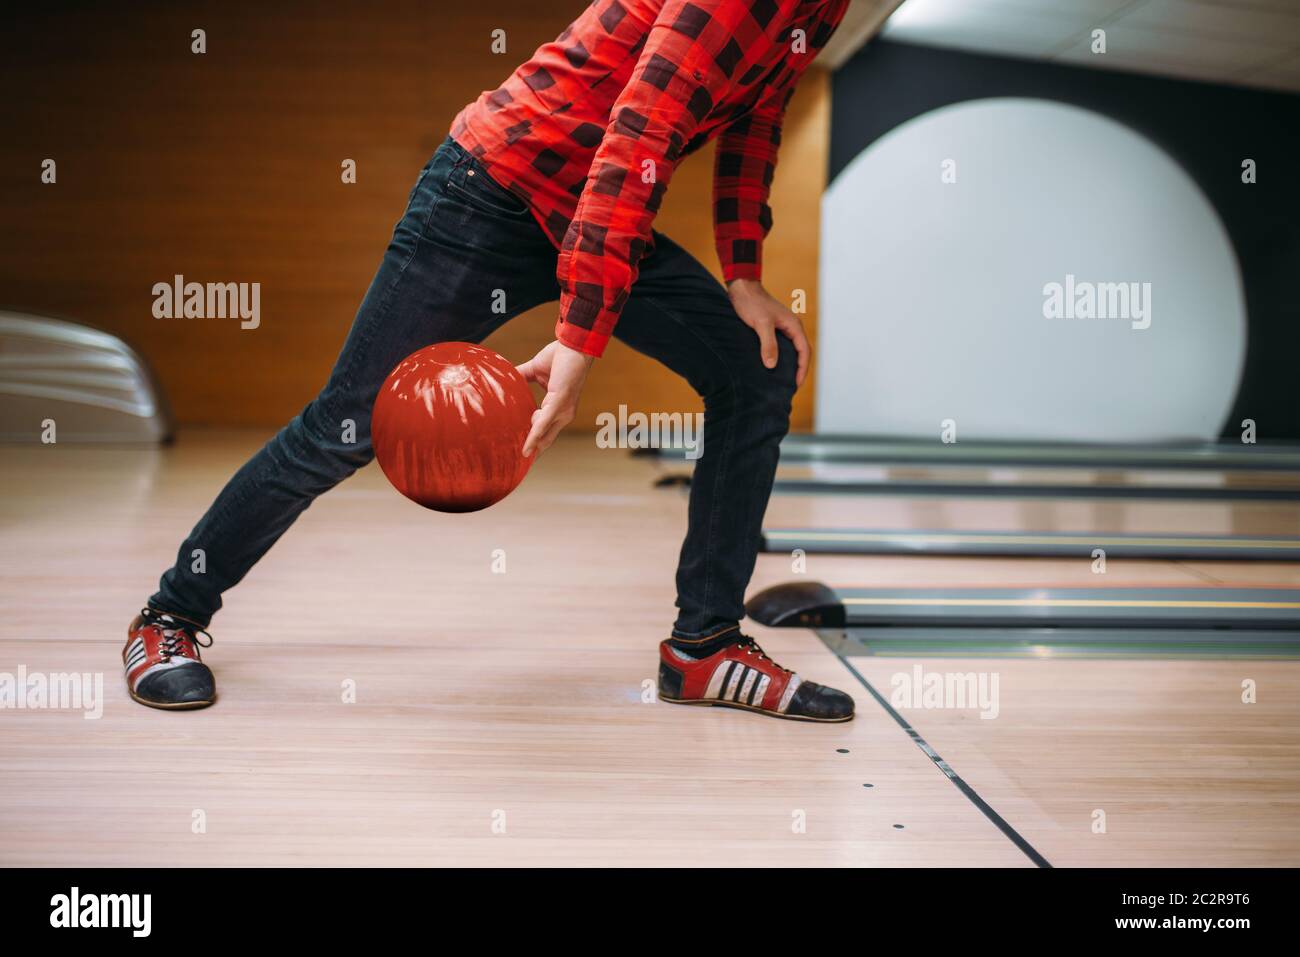 Male bowler makes throw, closeup view on hand with ball. Bowling alley player, throwing in action, classical tenpin game in club Stock Photo